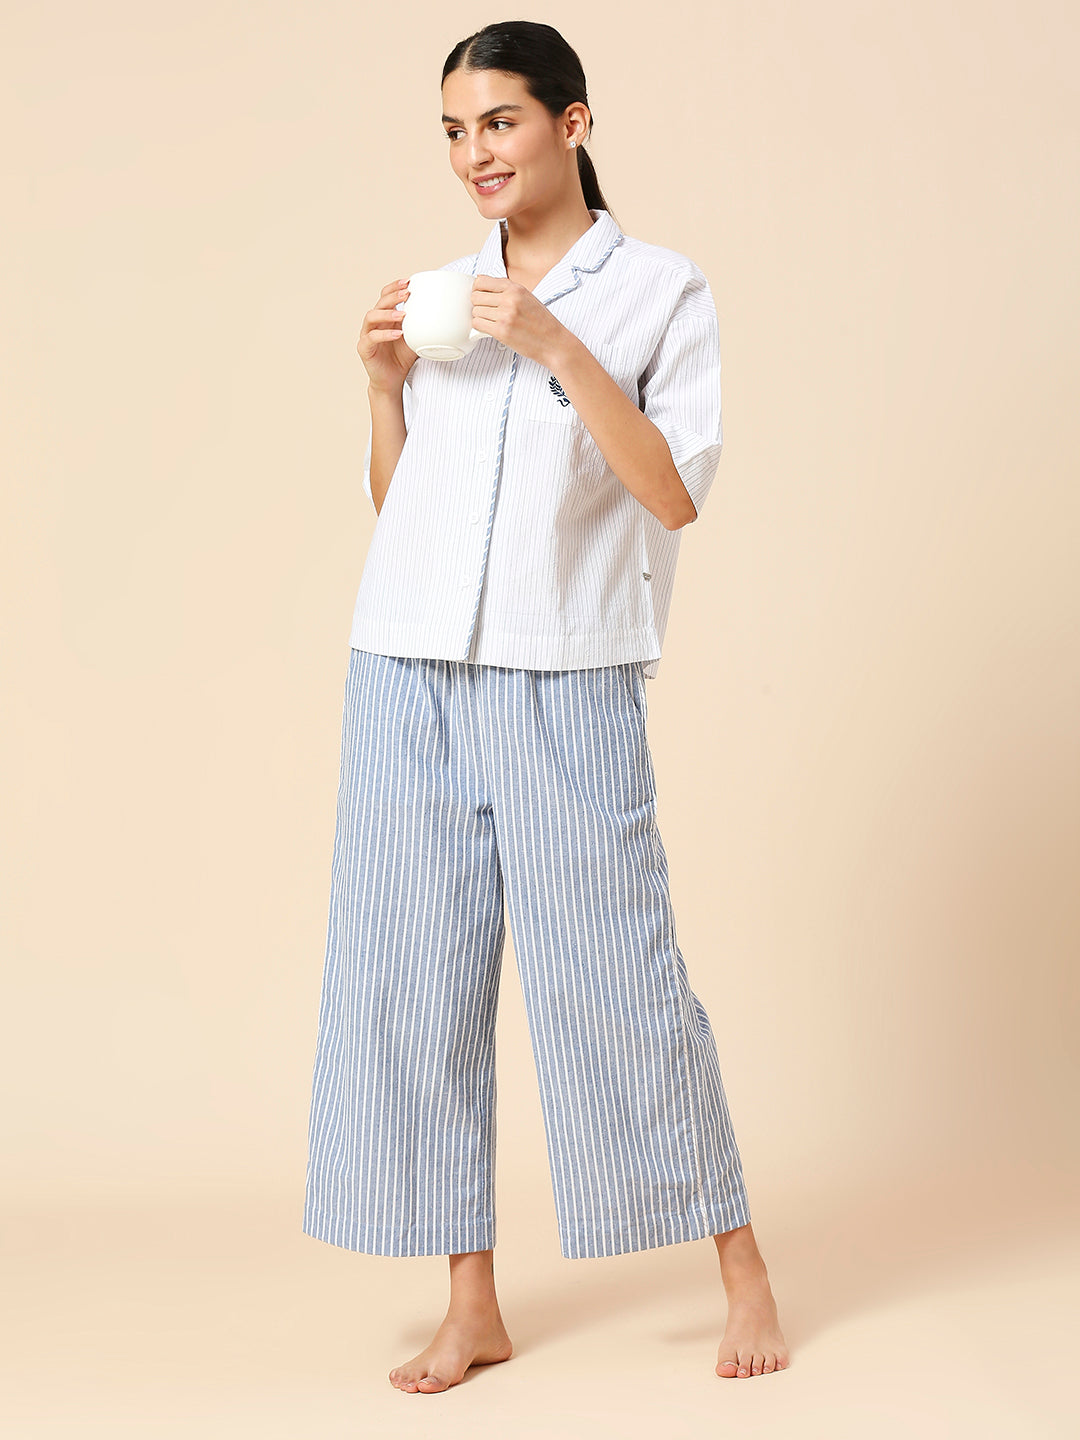 EMBROIDERED POCKET LAPEL COLLAR NIGHT SHIRT & WIDE LEG COTTON STRIPED NIGHTSUIT